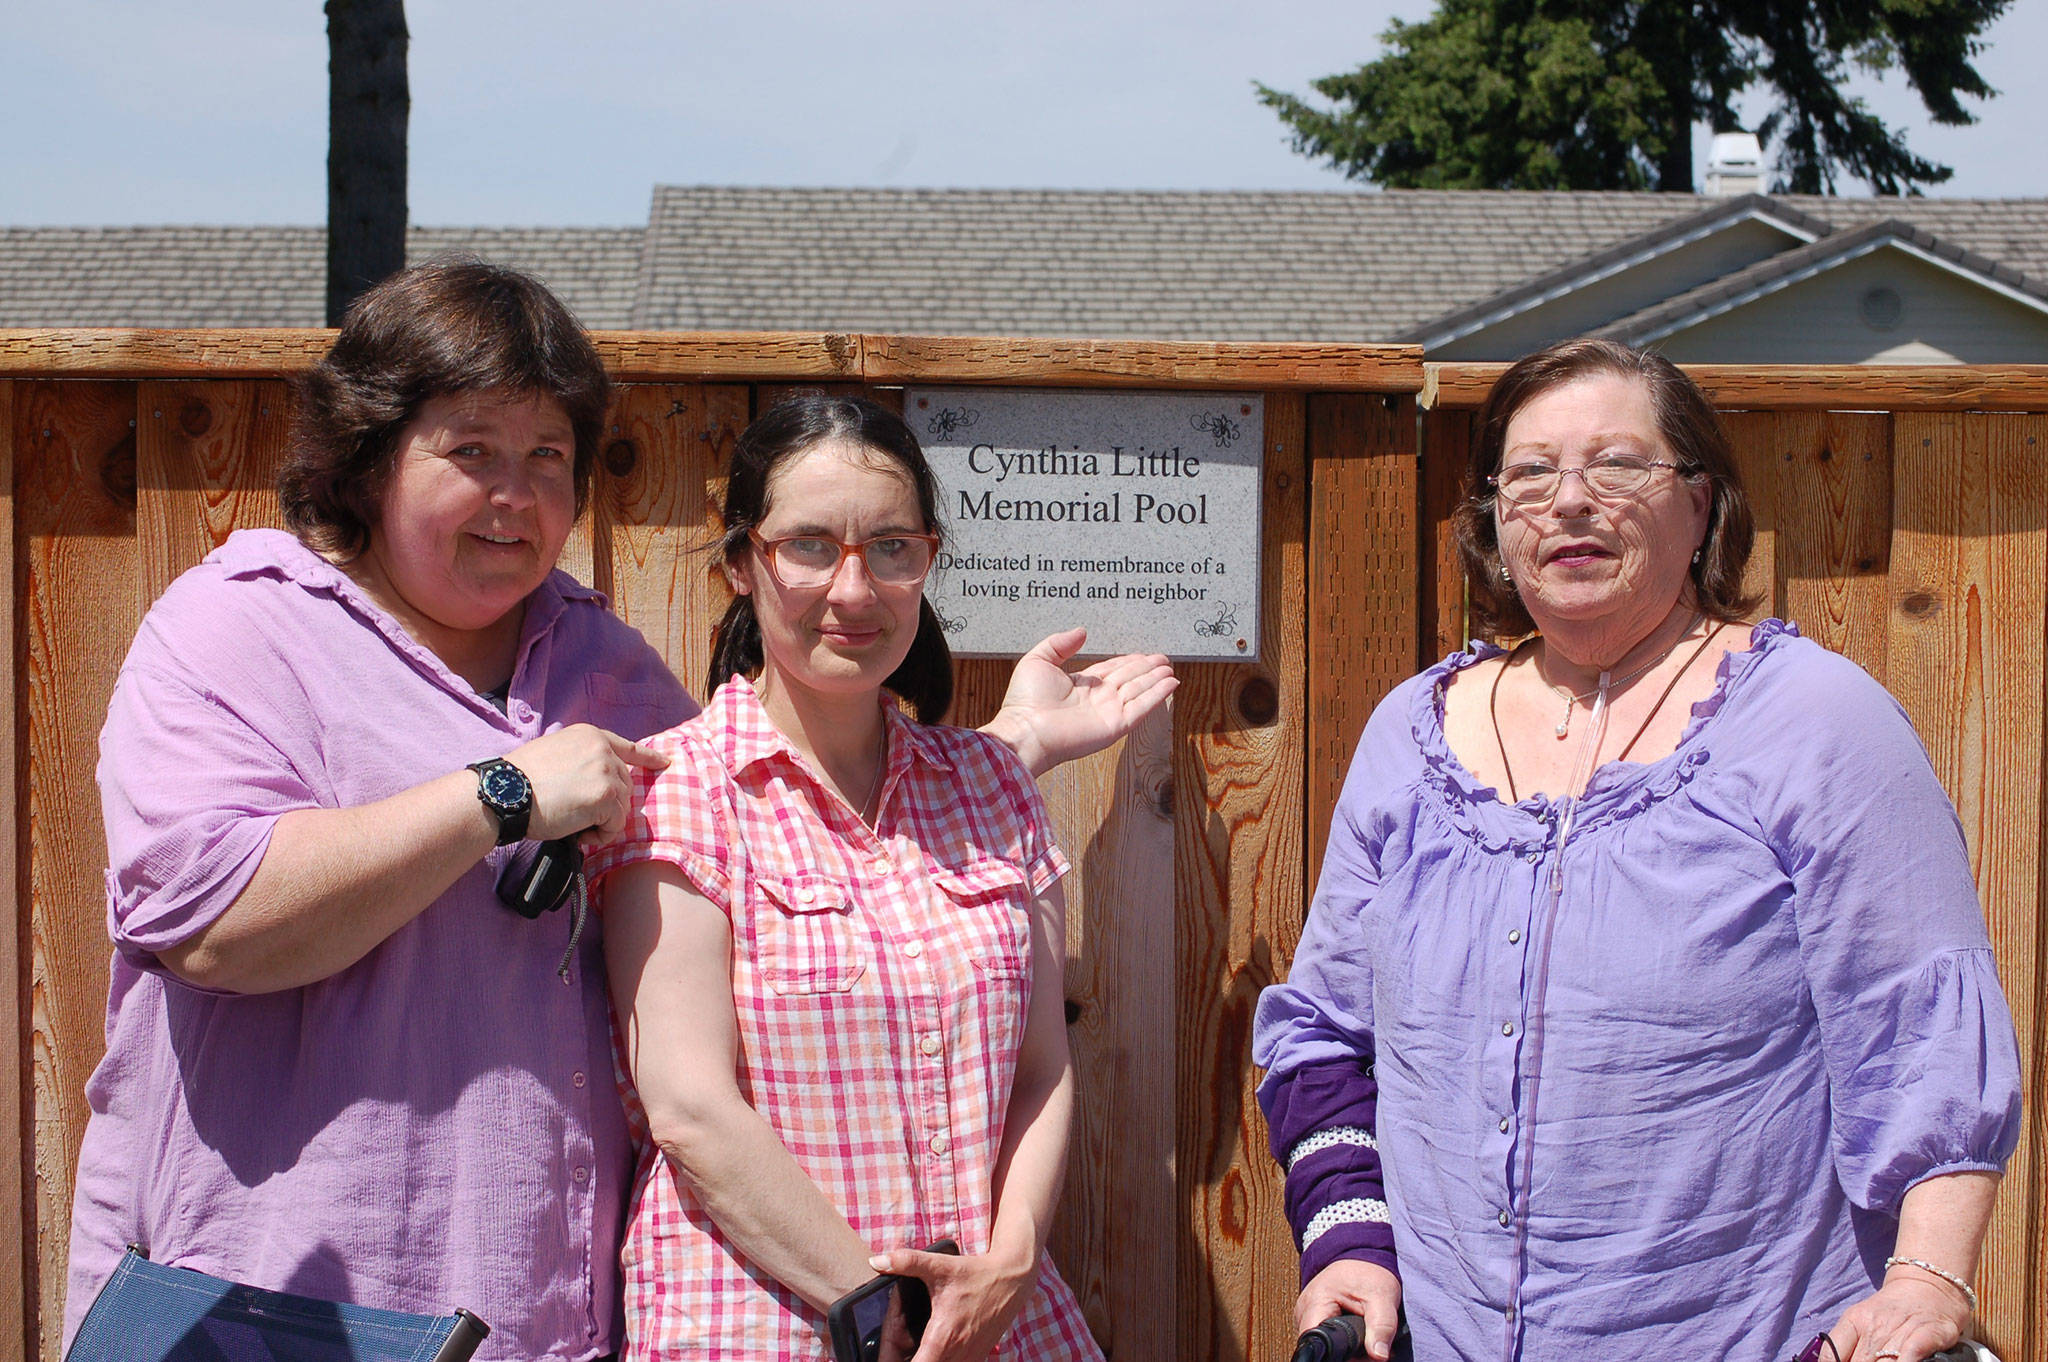 Bernie Philbin, left, CASA volunteer Emma Jones and Maggie Philbin, all close friends of Cynthia Little, stand next to Little’s dedication plaque at the Sunland Golf Country Club pool. (Erin Hawkins/Olympic Peninsula News Group)